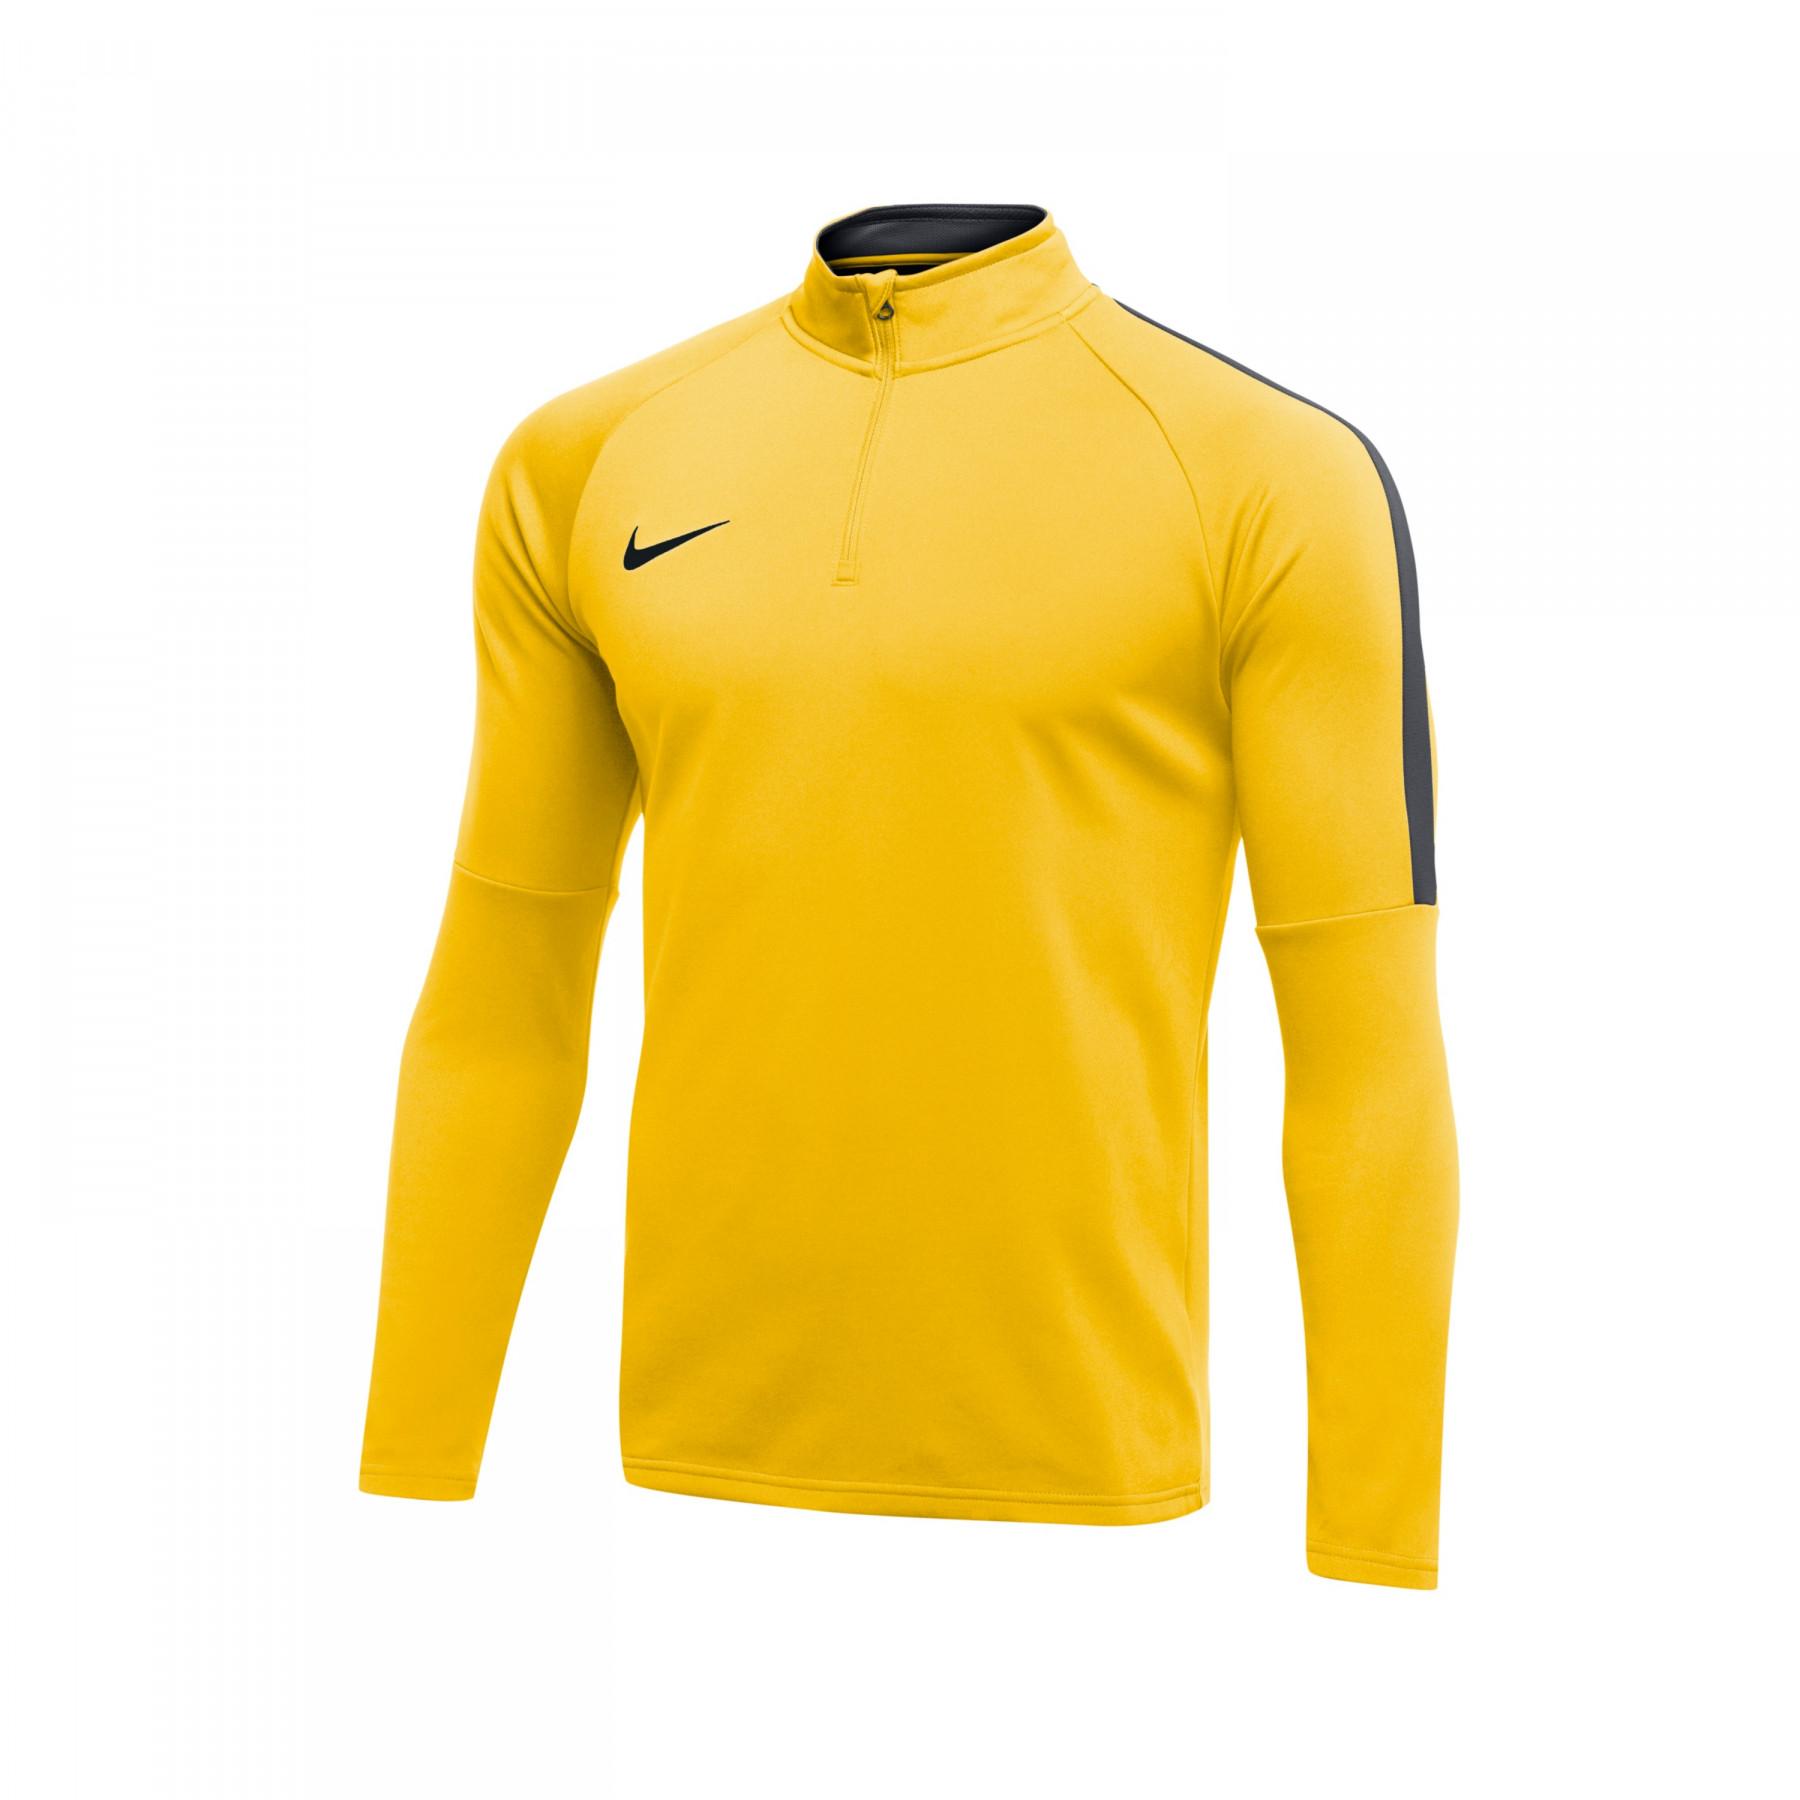 Maillot manches longues femme Nike Dry Academy 18 Drill